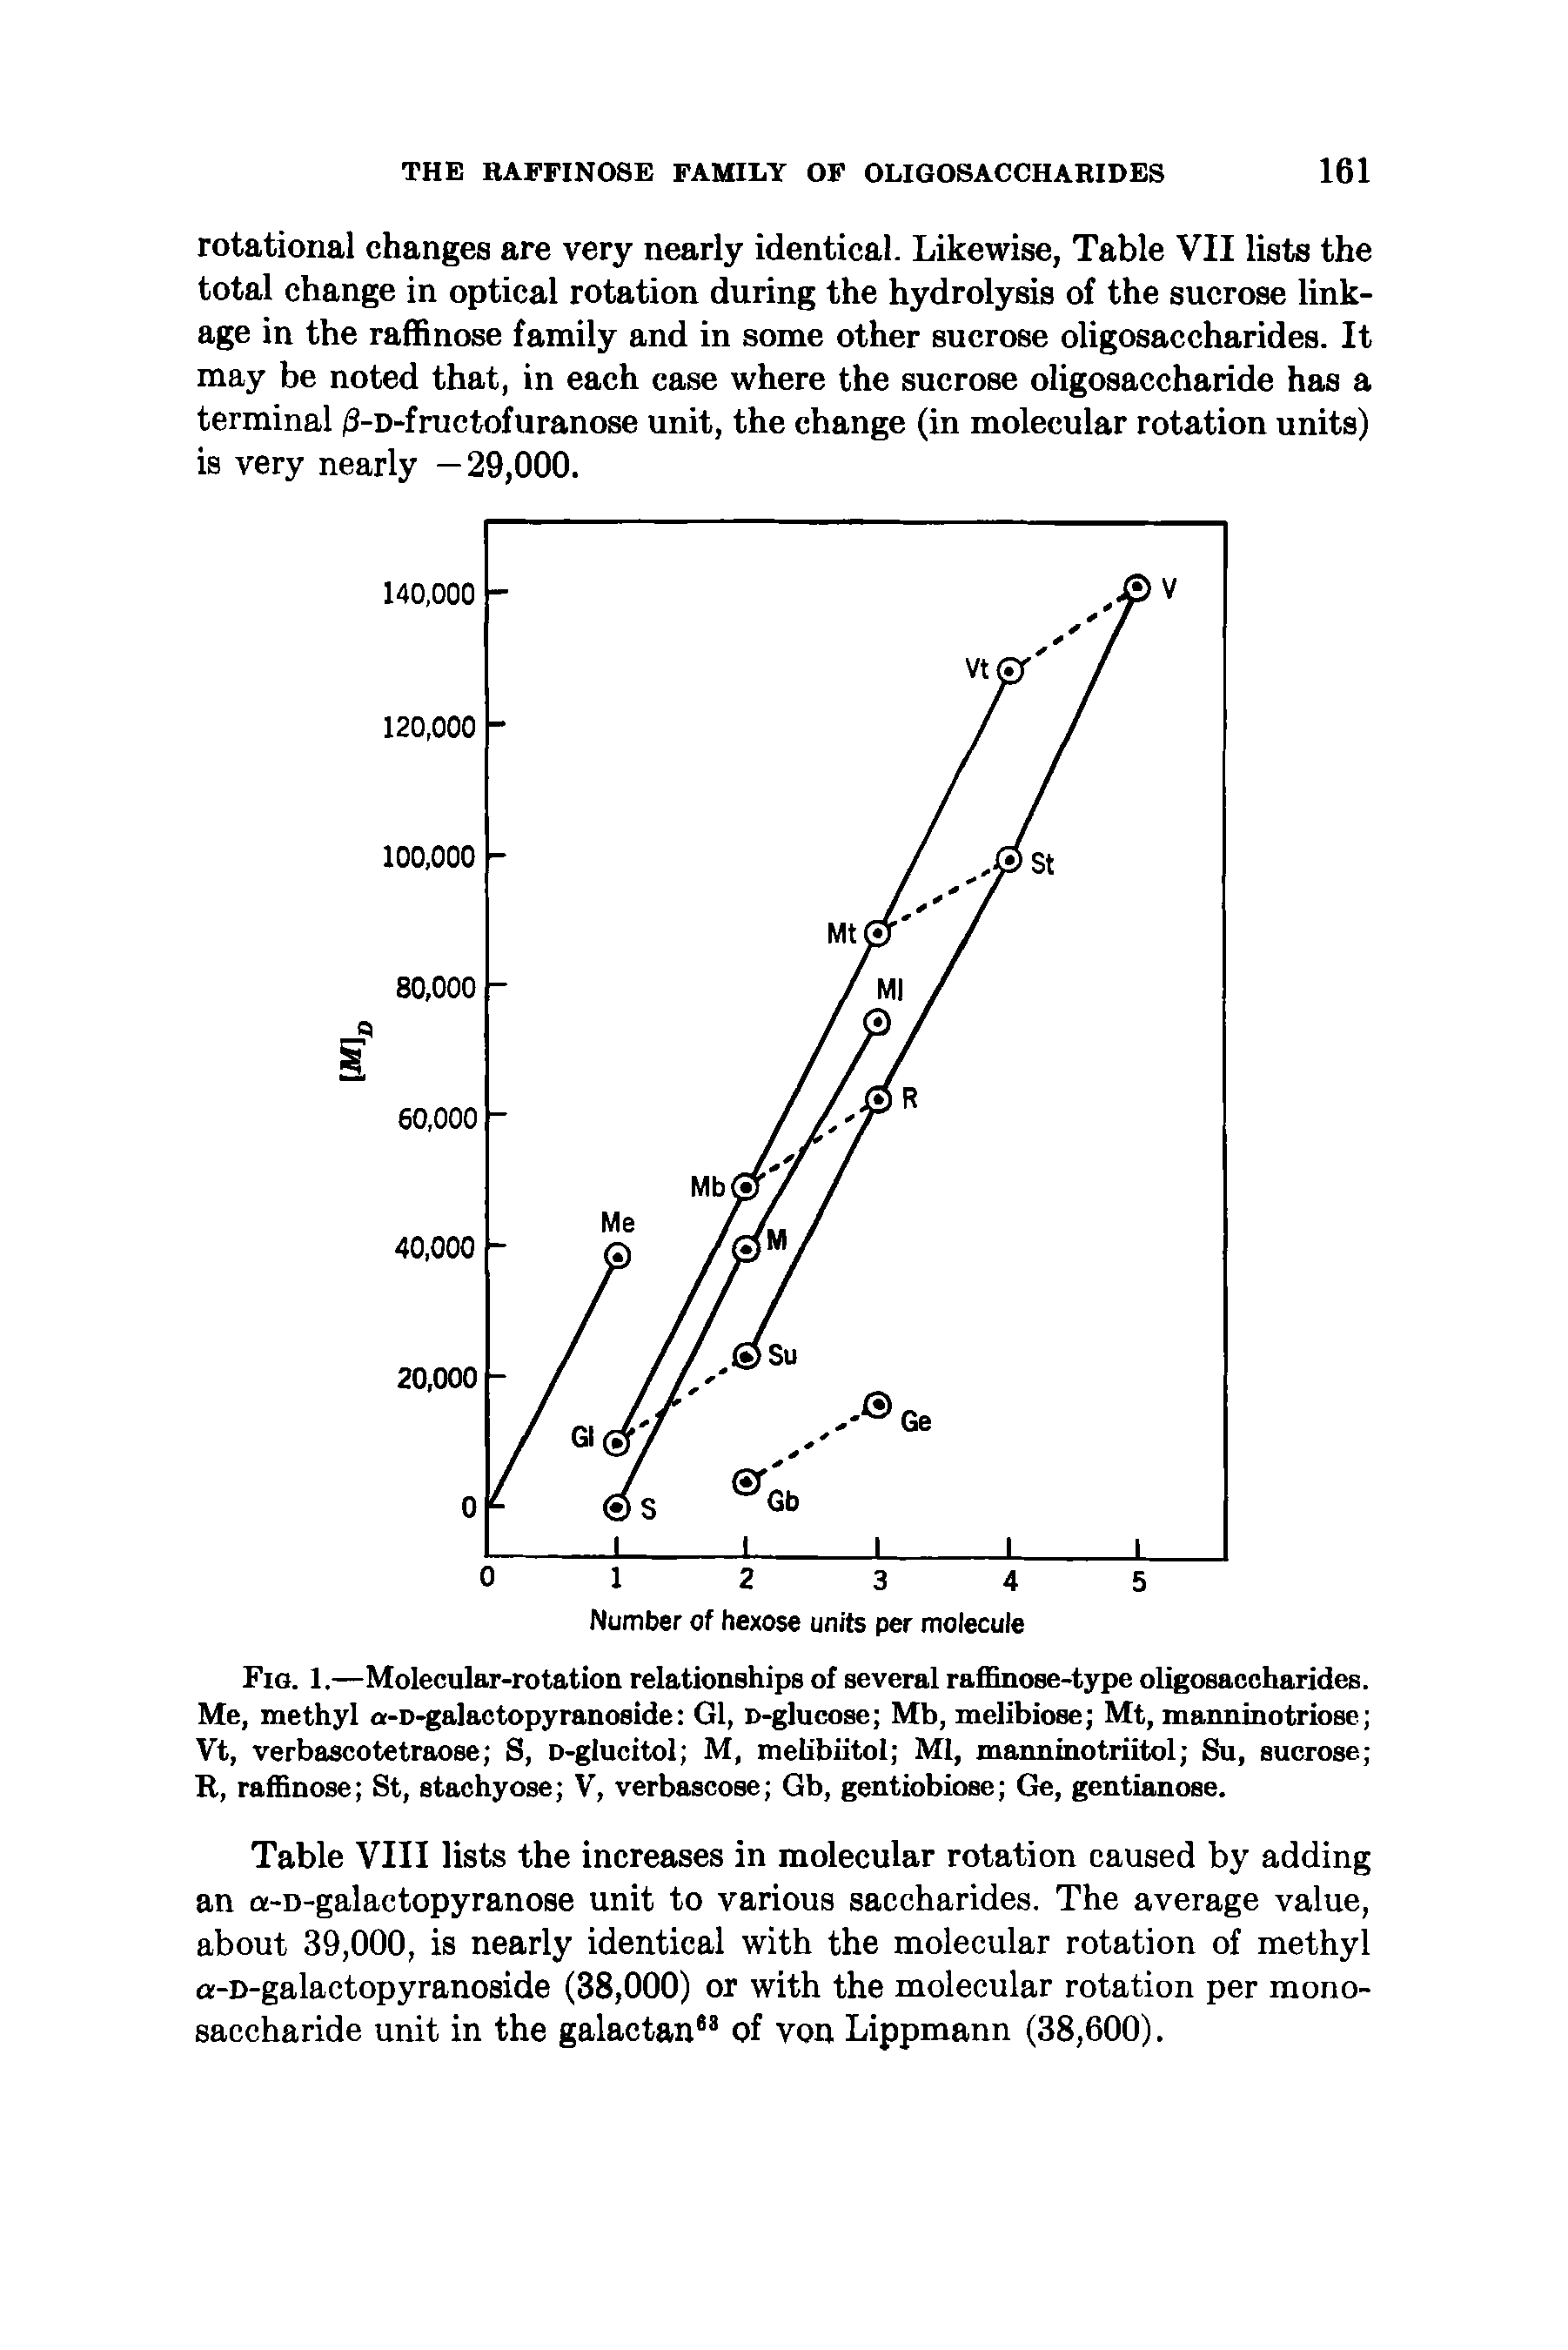 Table VIII lists the increases in molecular rotation caused by adding an a-D-galactopyranose unit to various saccharides. The average value, about 39,000, is nearly identical with the molecular rotation of methyl a-D-galactopyranoside (38,000) or with the molecular rotation per monosaccharide unit in the galactan68 of von Lippmann (38,600).